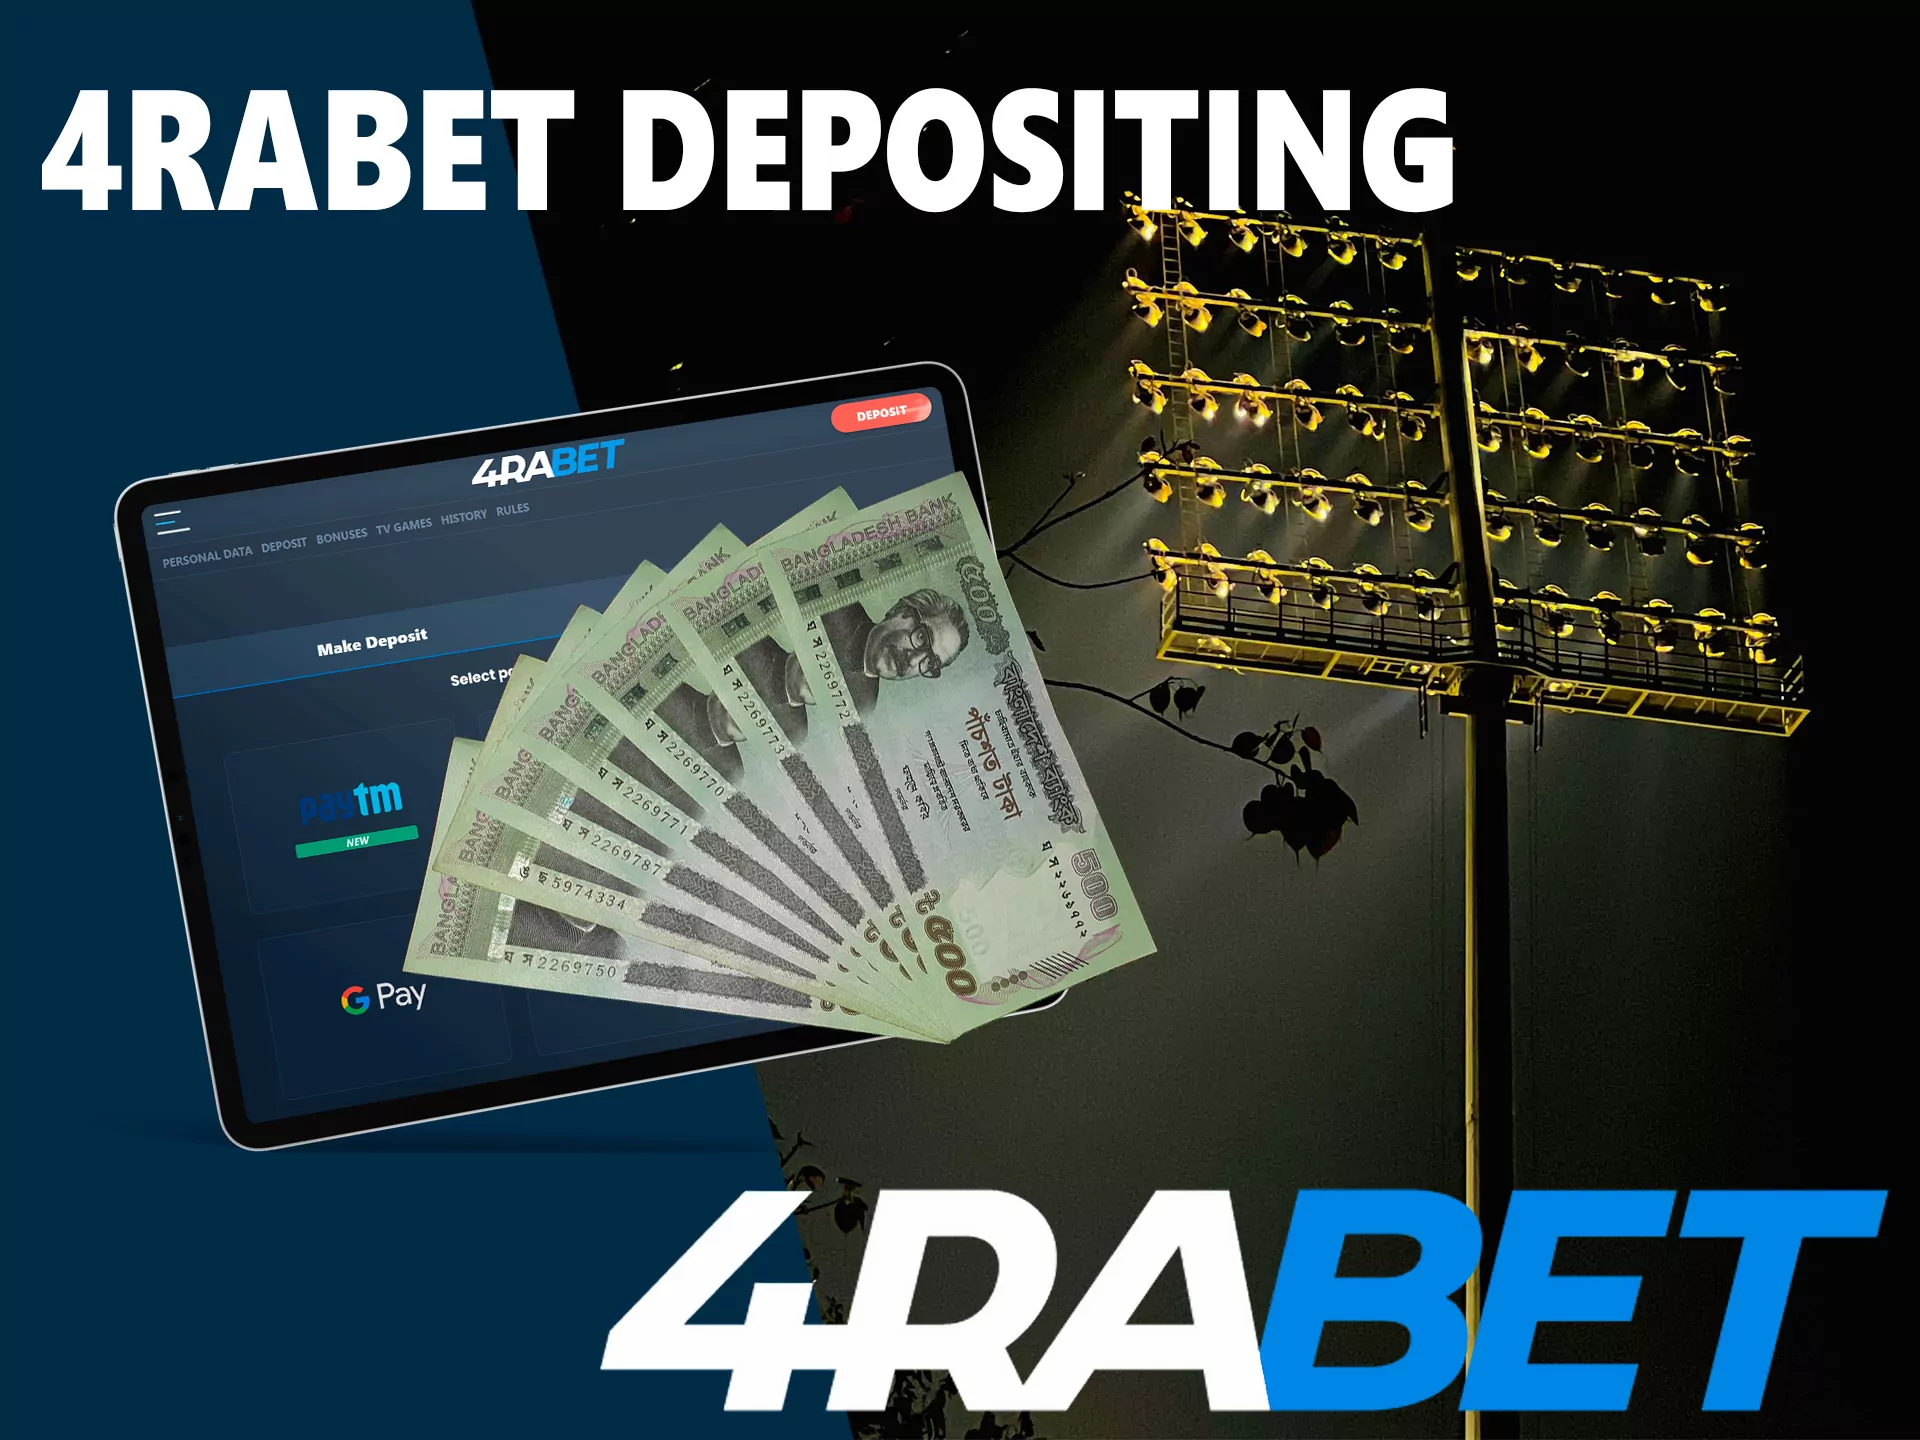 Fund your account to start playing at 4rabet.